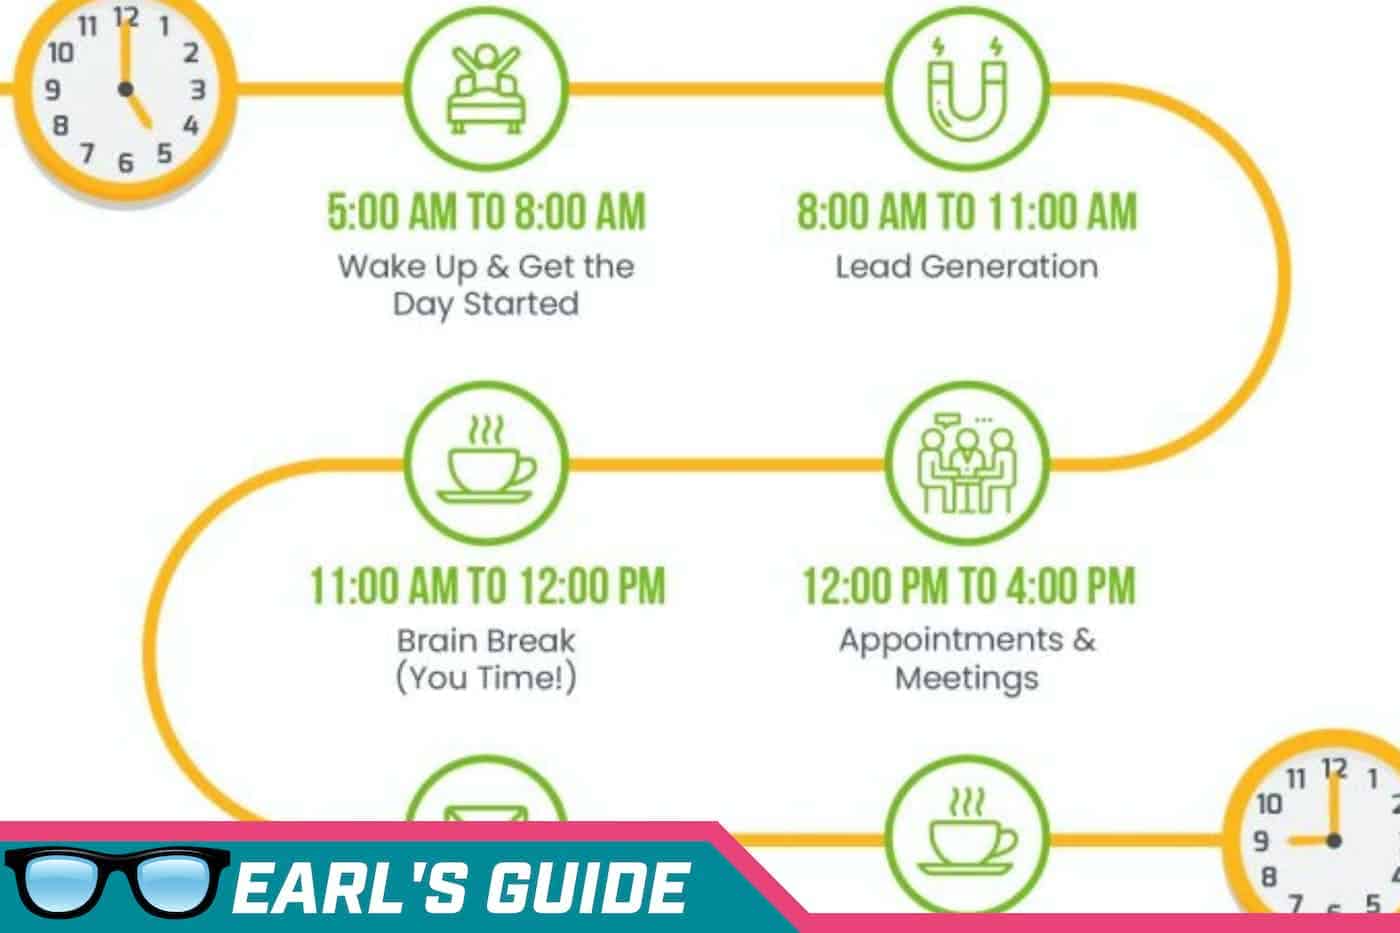 Example of a successful real estate agent daily schedule